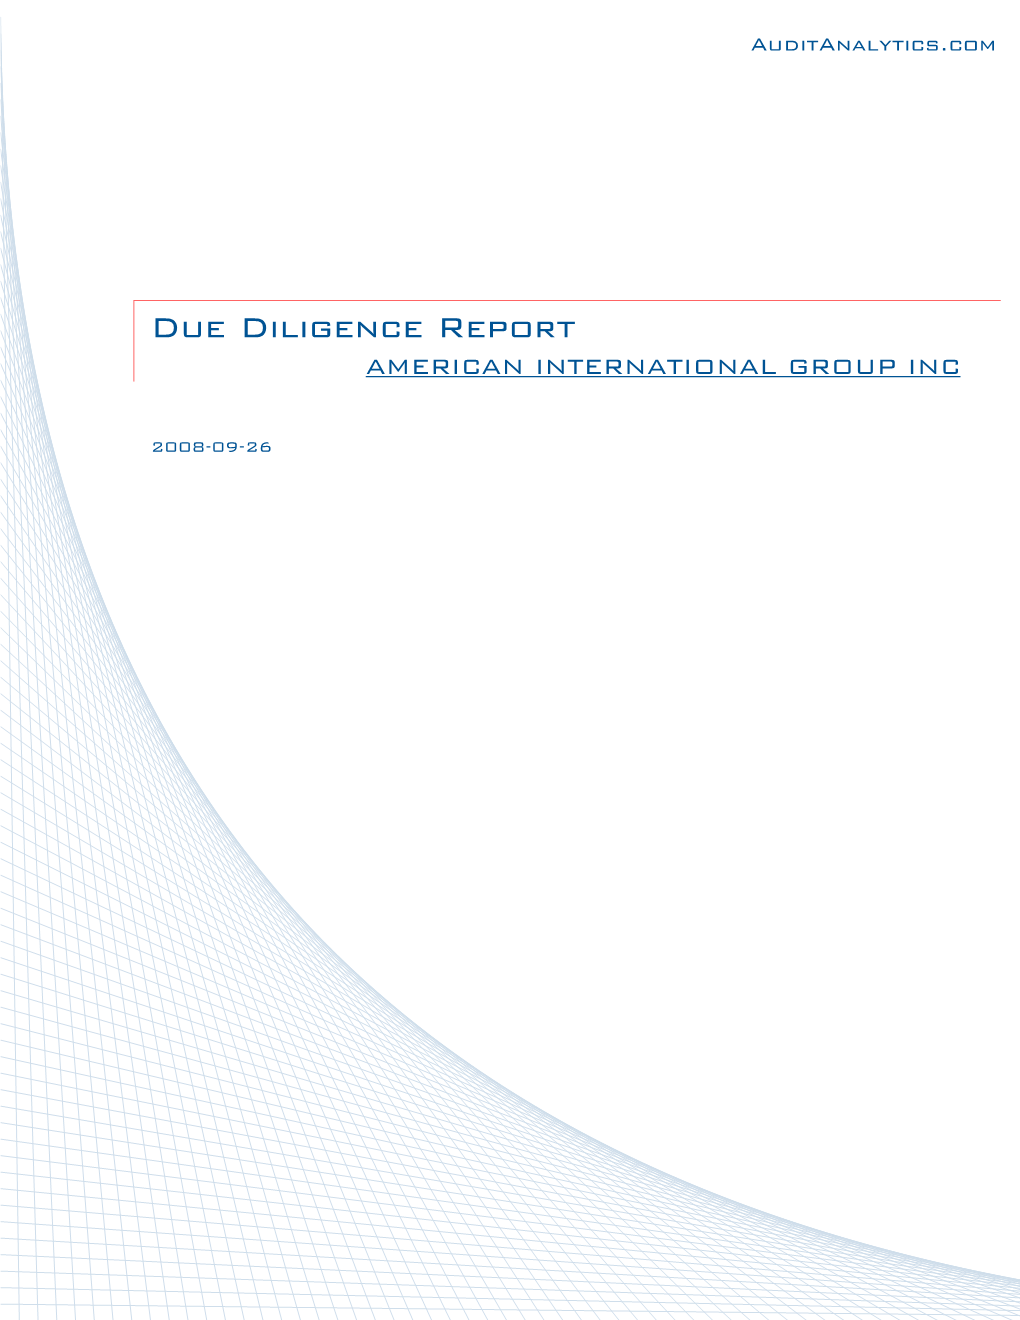 Due Diligence Report AMERICAN INTERNATIONAL GROUP INC